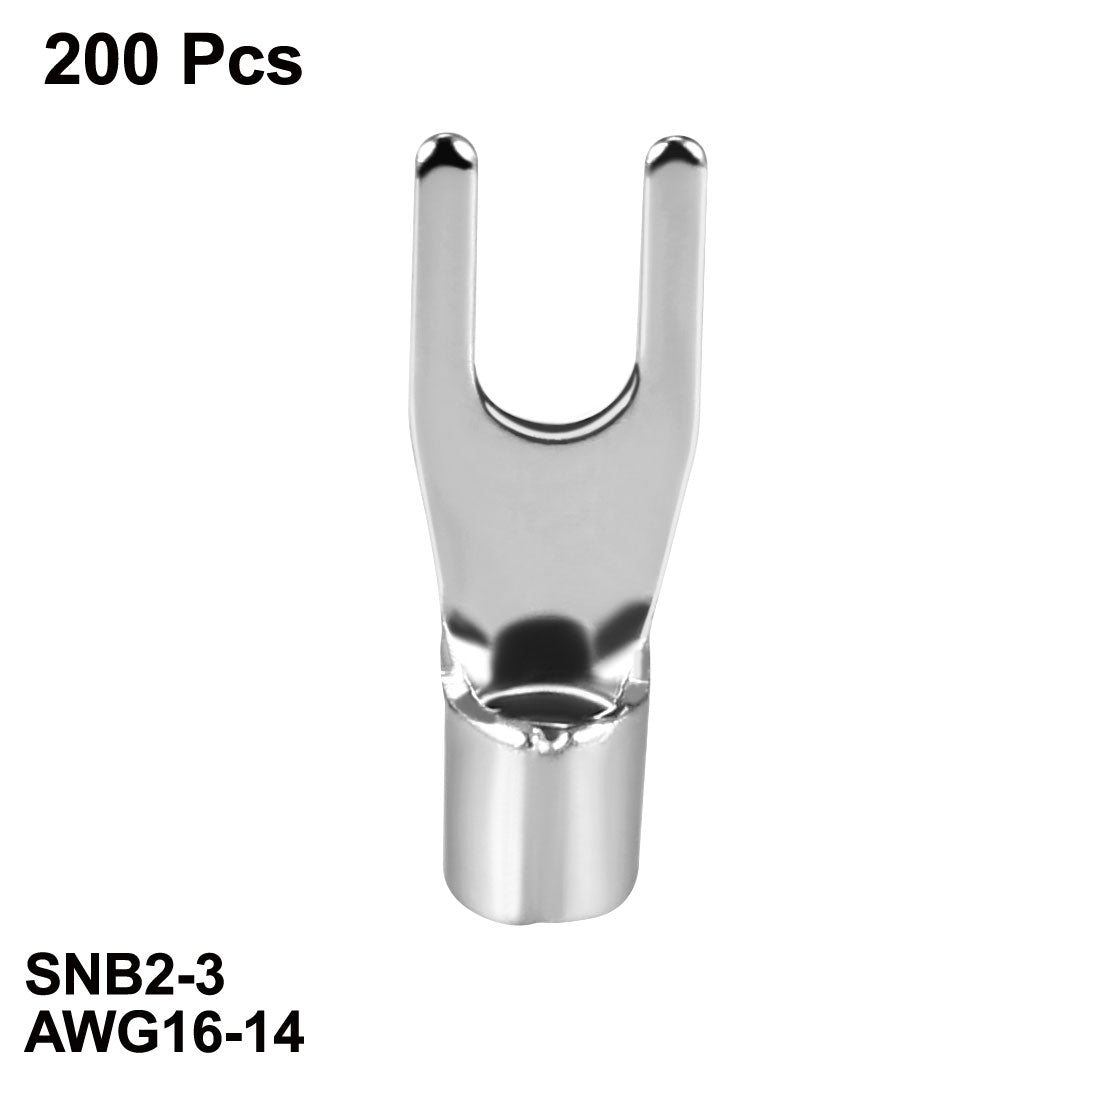 uxcell Uxcell 200x Fork Type Copper Non-Insulated Spade Terminals SNB2-3, 16-14 Wire Size, #4 Stud Size